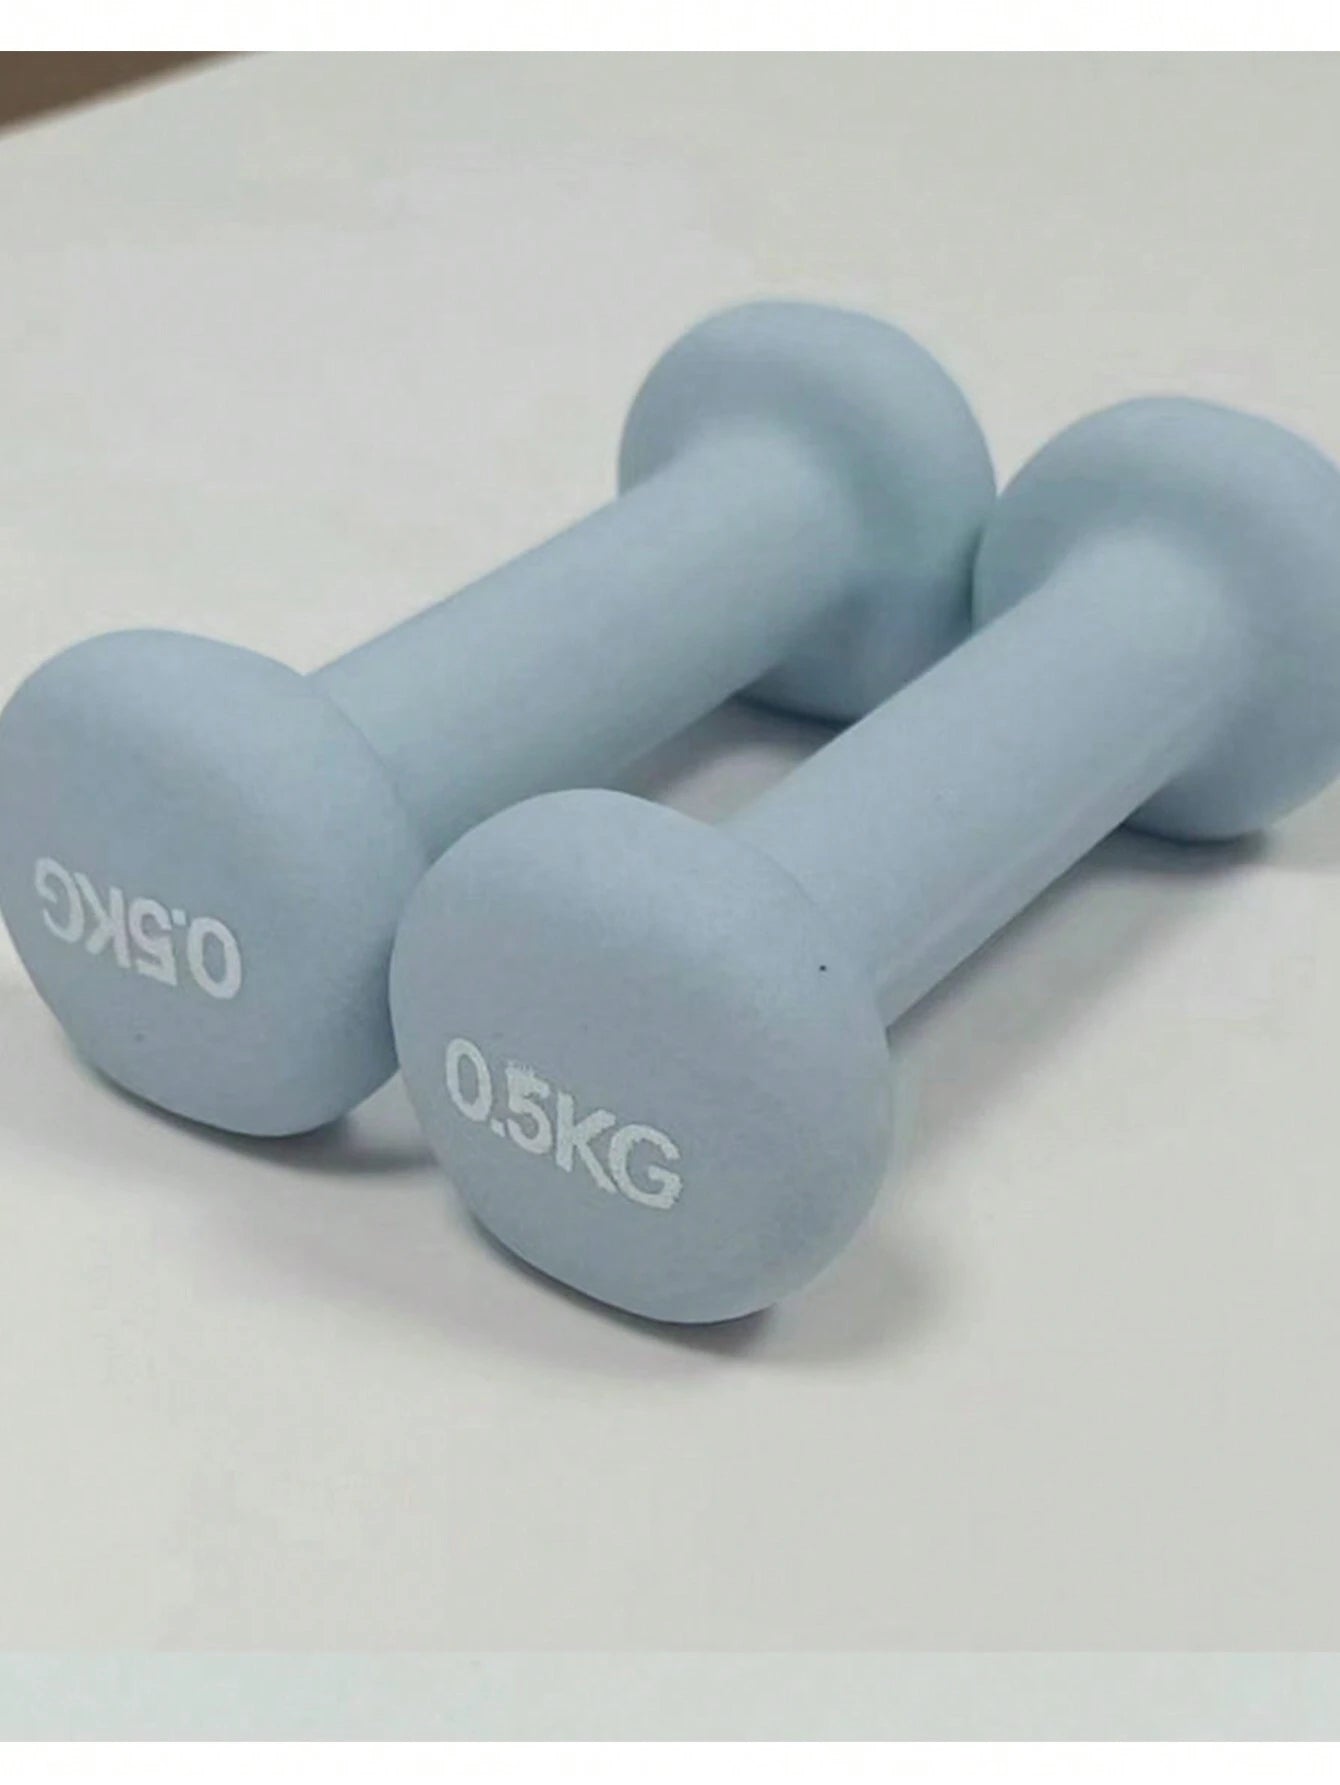 Single Frosted Plastic Dumbbell for Yoga Fitness, suitable for both Men and Women. Solid Cast Iron Dumbbell for Home Exercise. Packaging may vary.